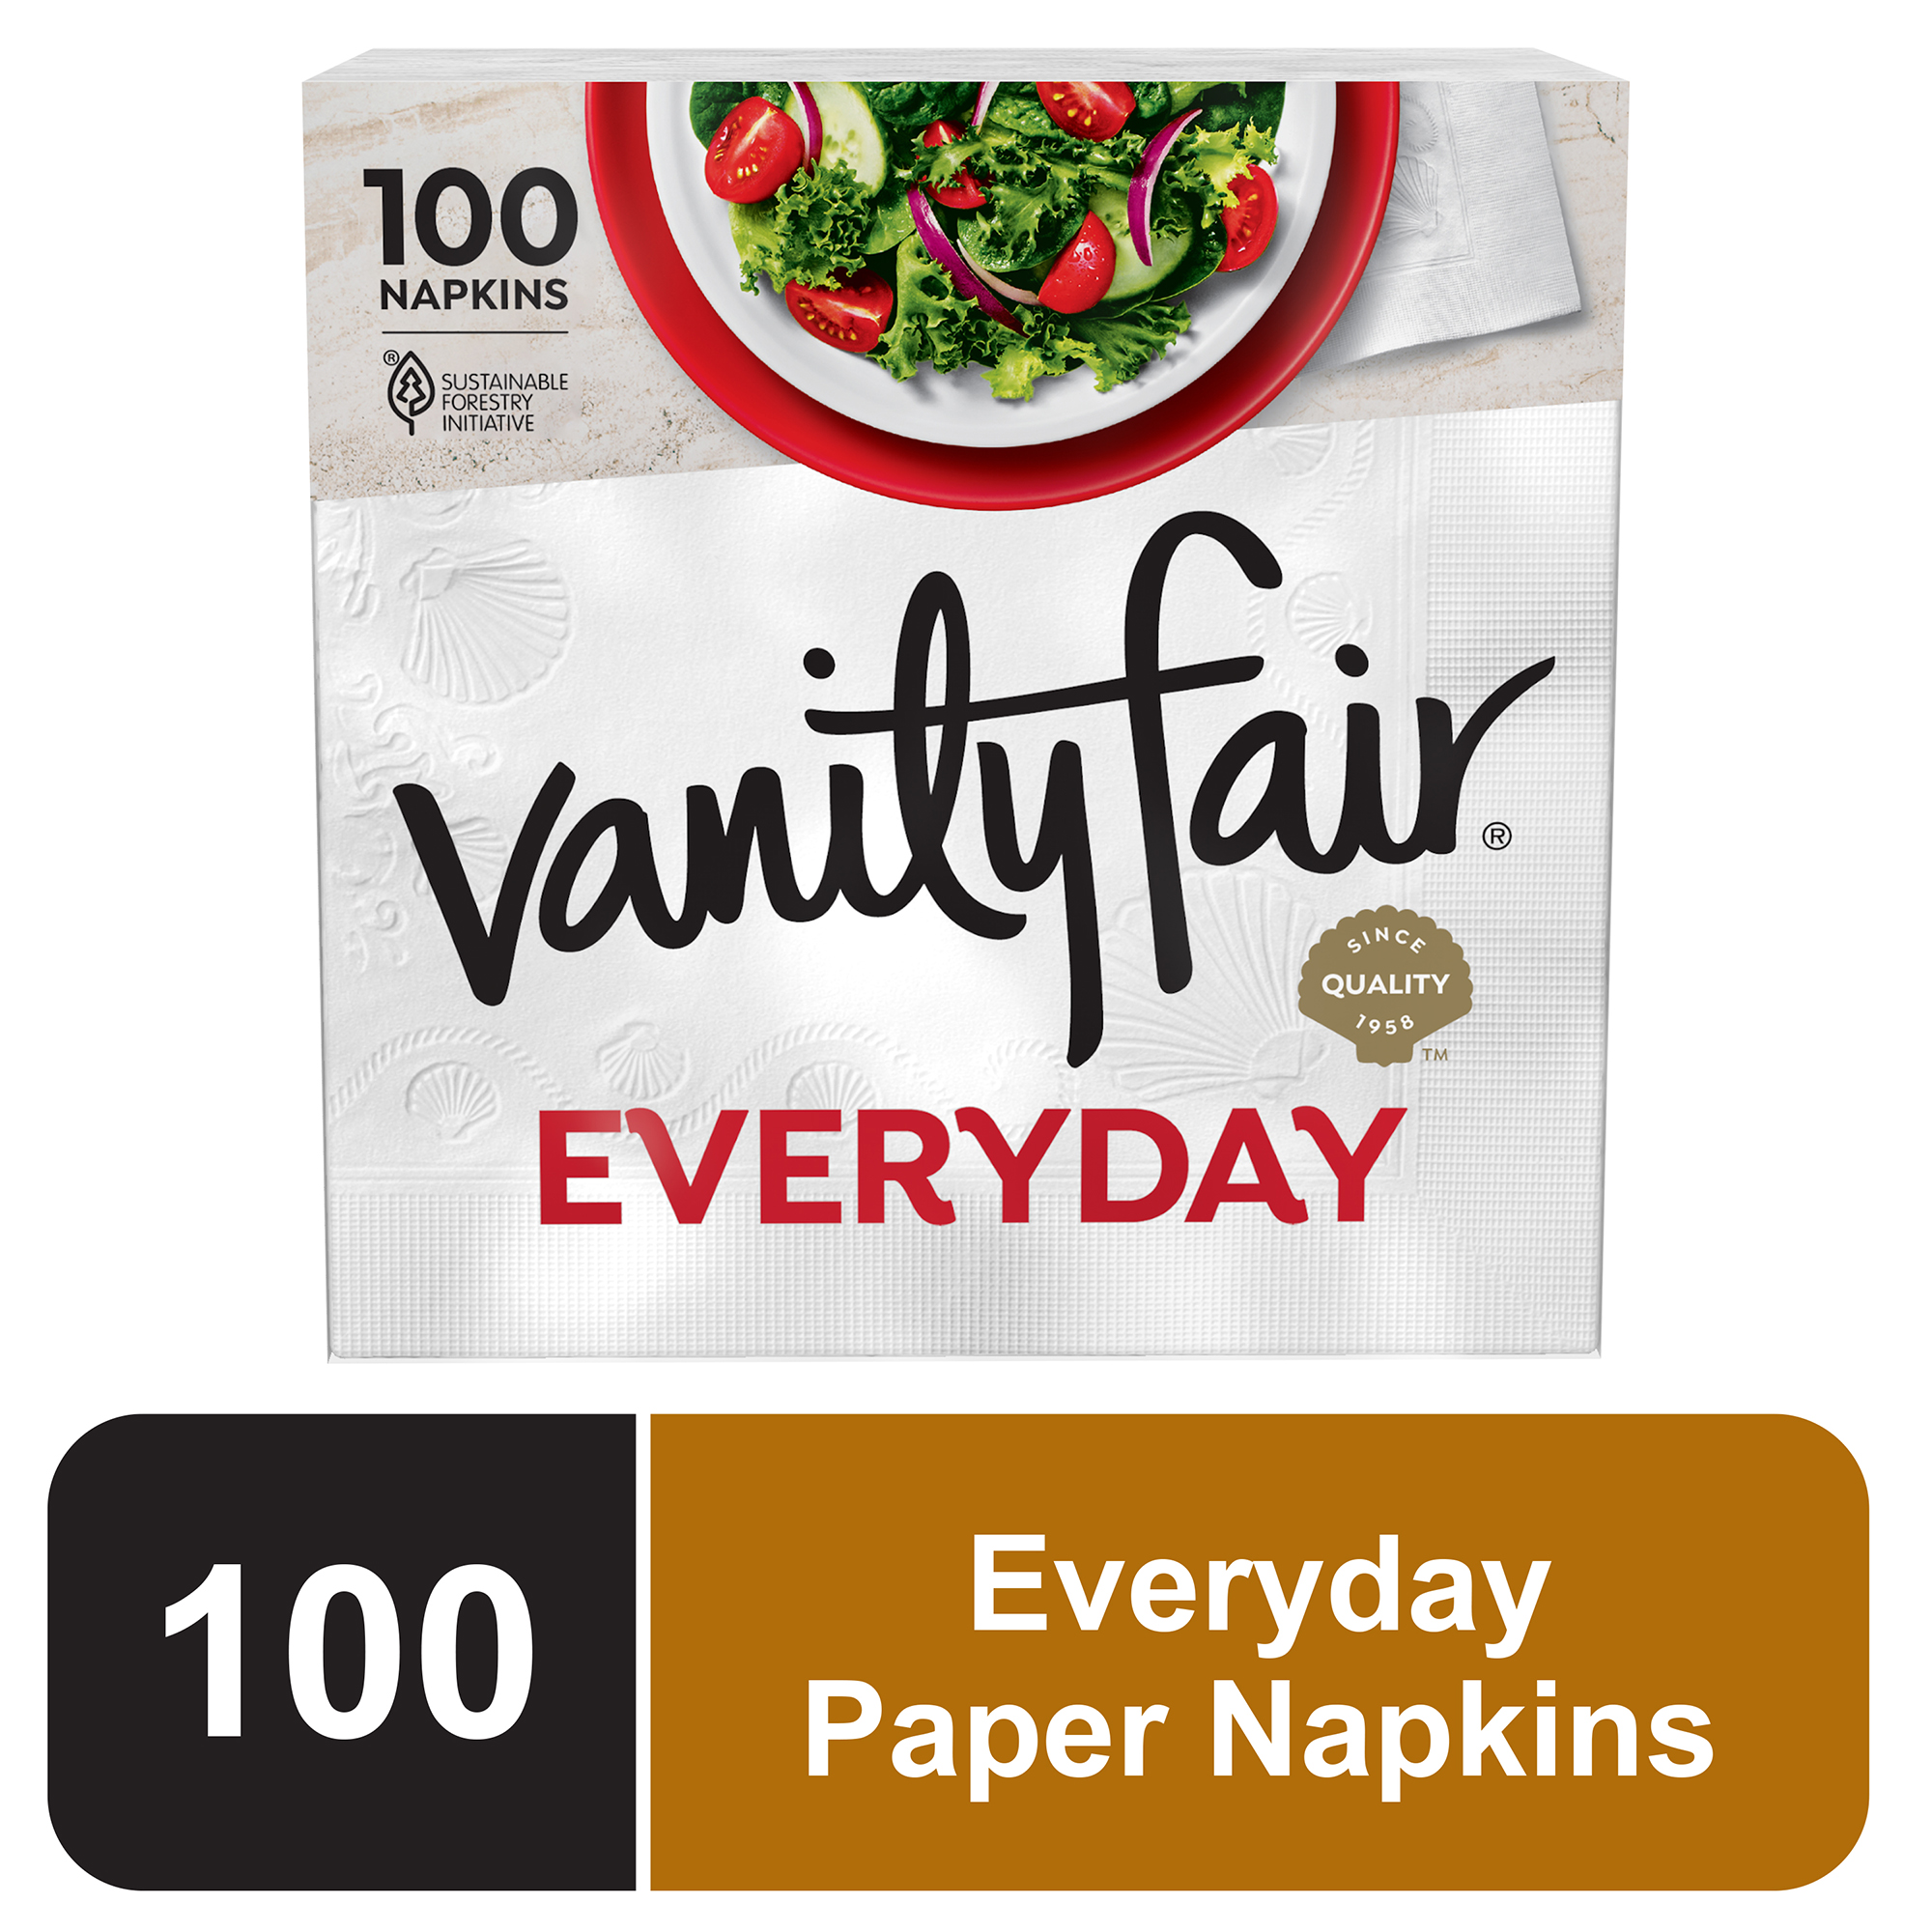 Vanity Fair Everyday Disposable Paper Napkins, White, 100 Count - image 1 of 14